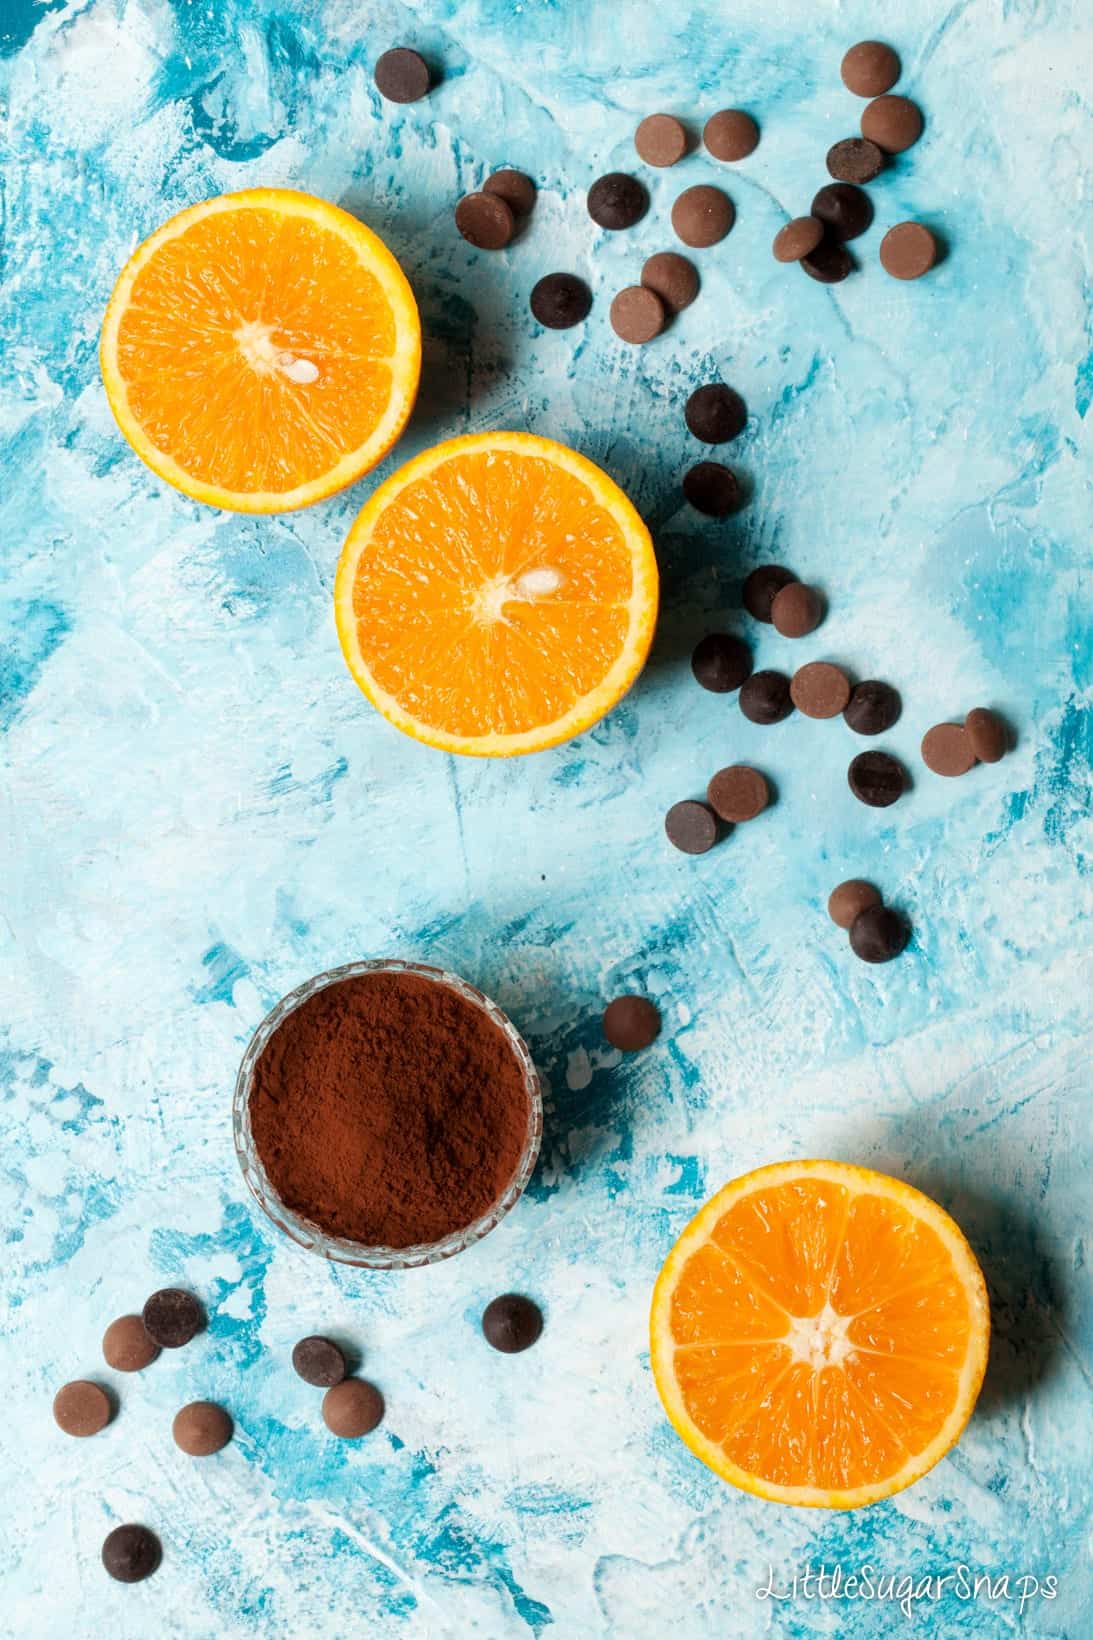 Chocolate chips and halves of orange on a blue worktop.